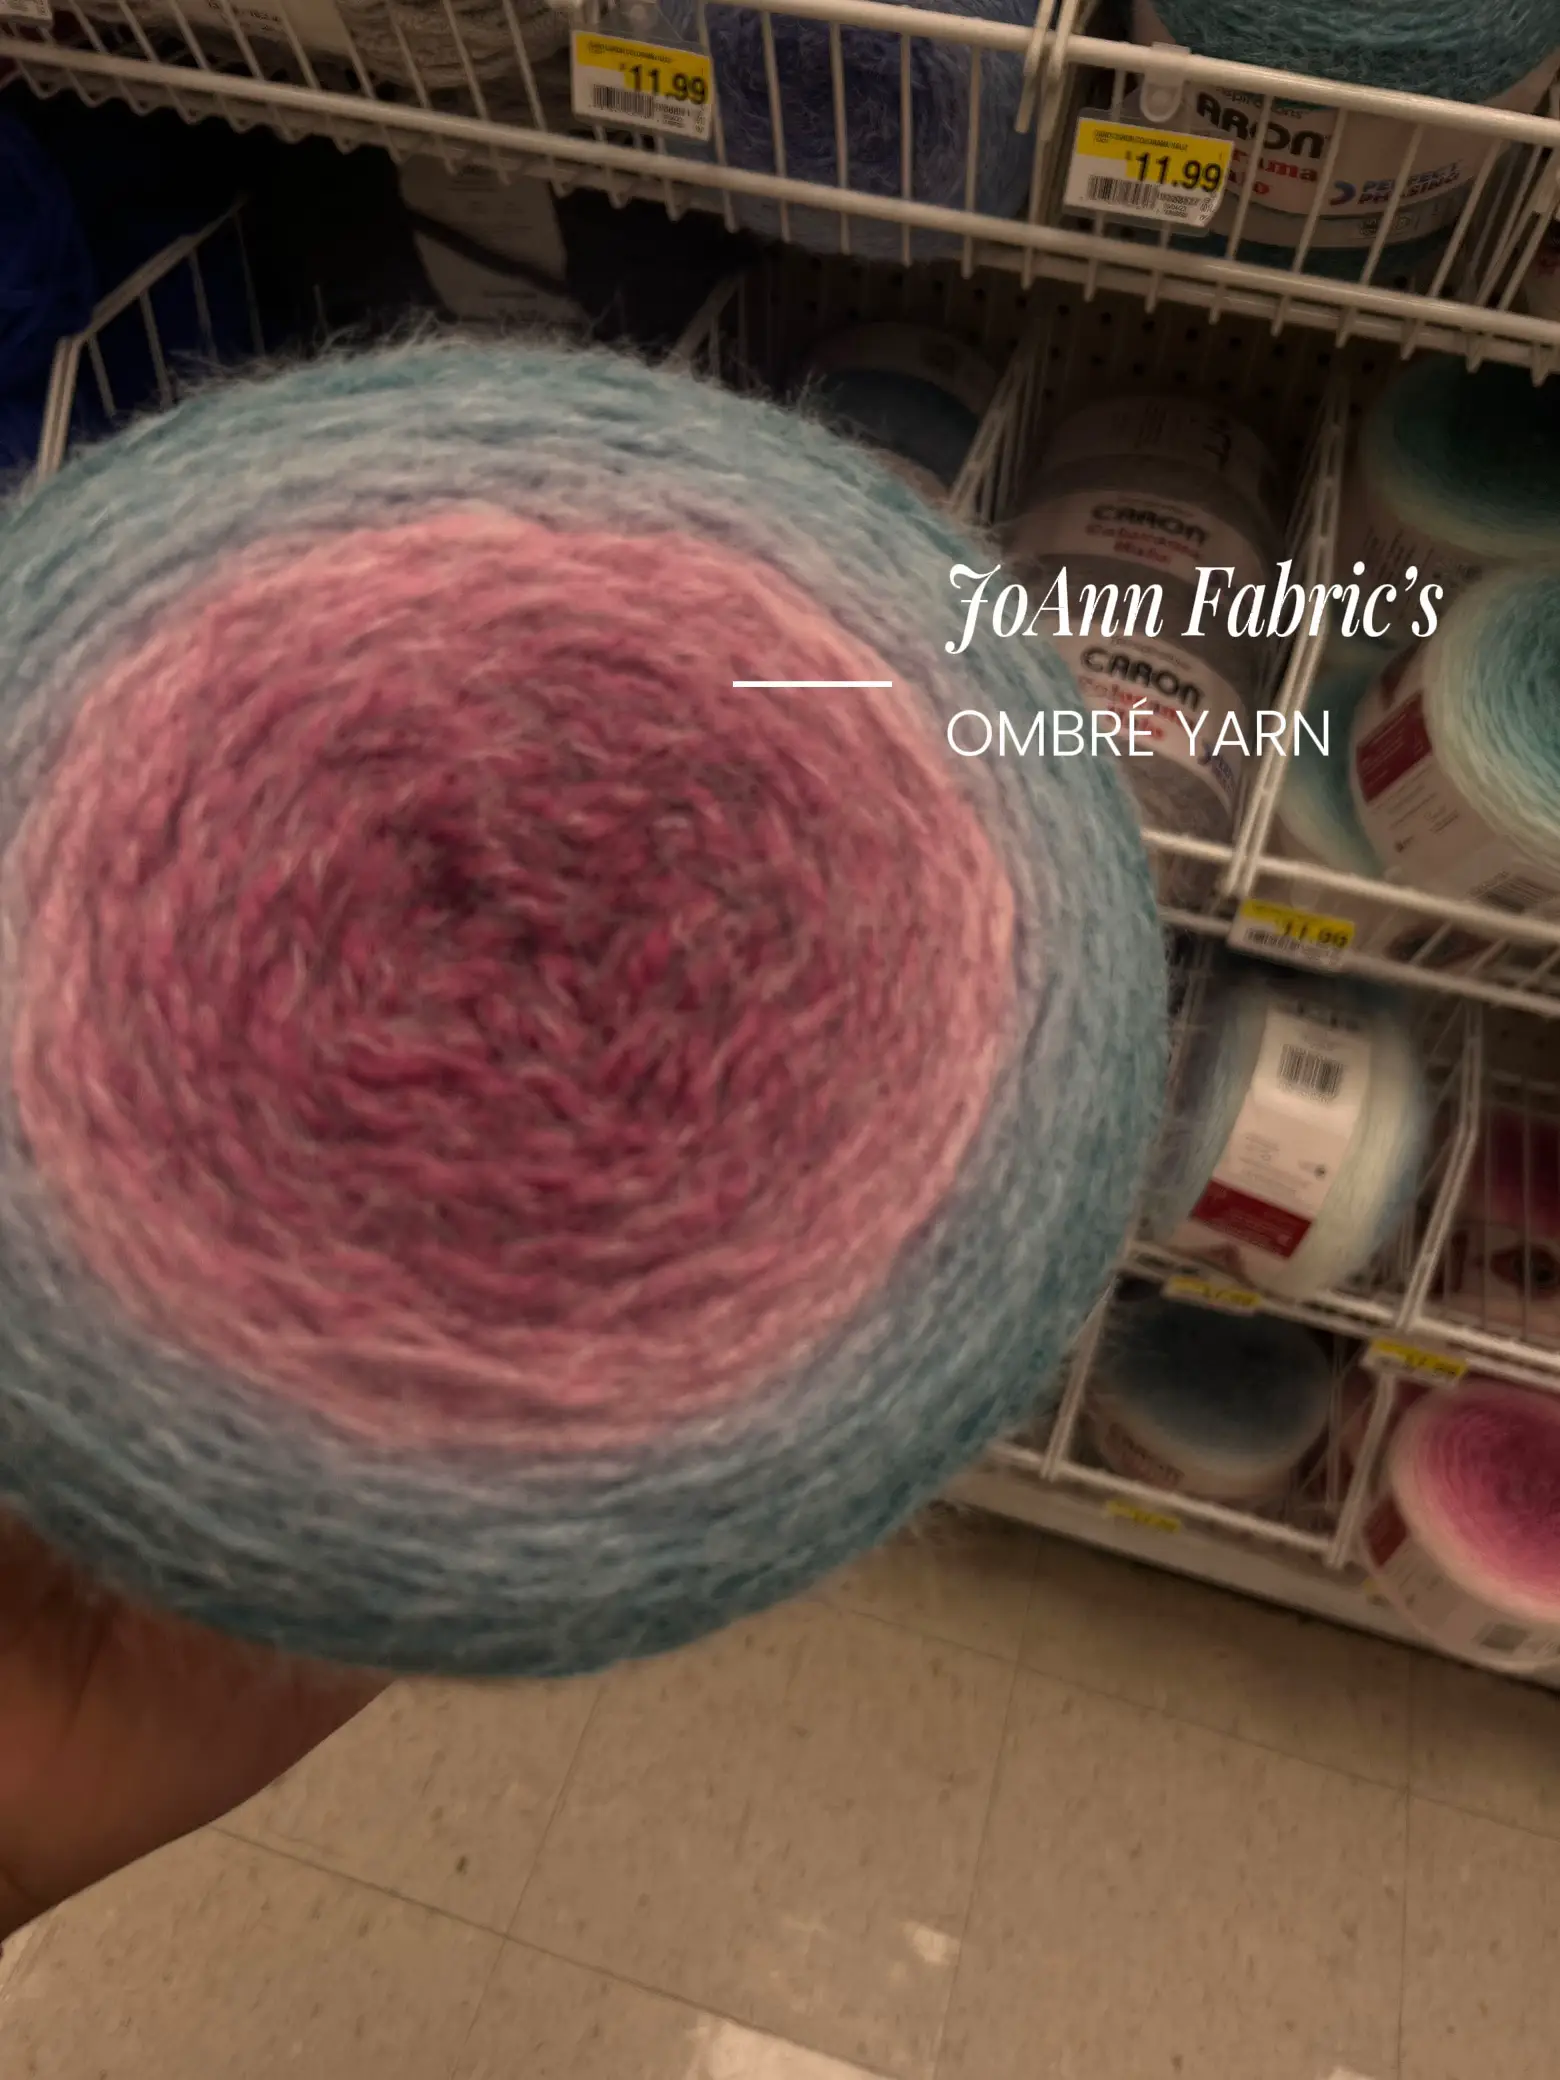 What can I make with this type of novelty yarn? : r/YarnAddicts